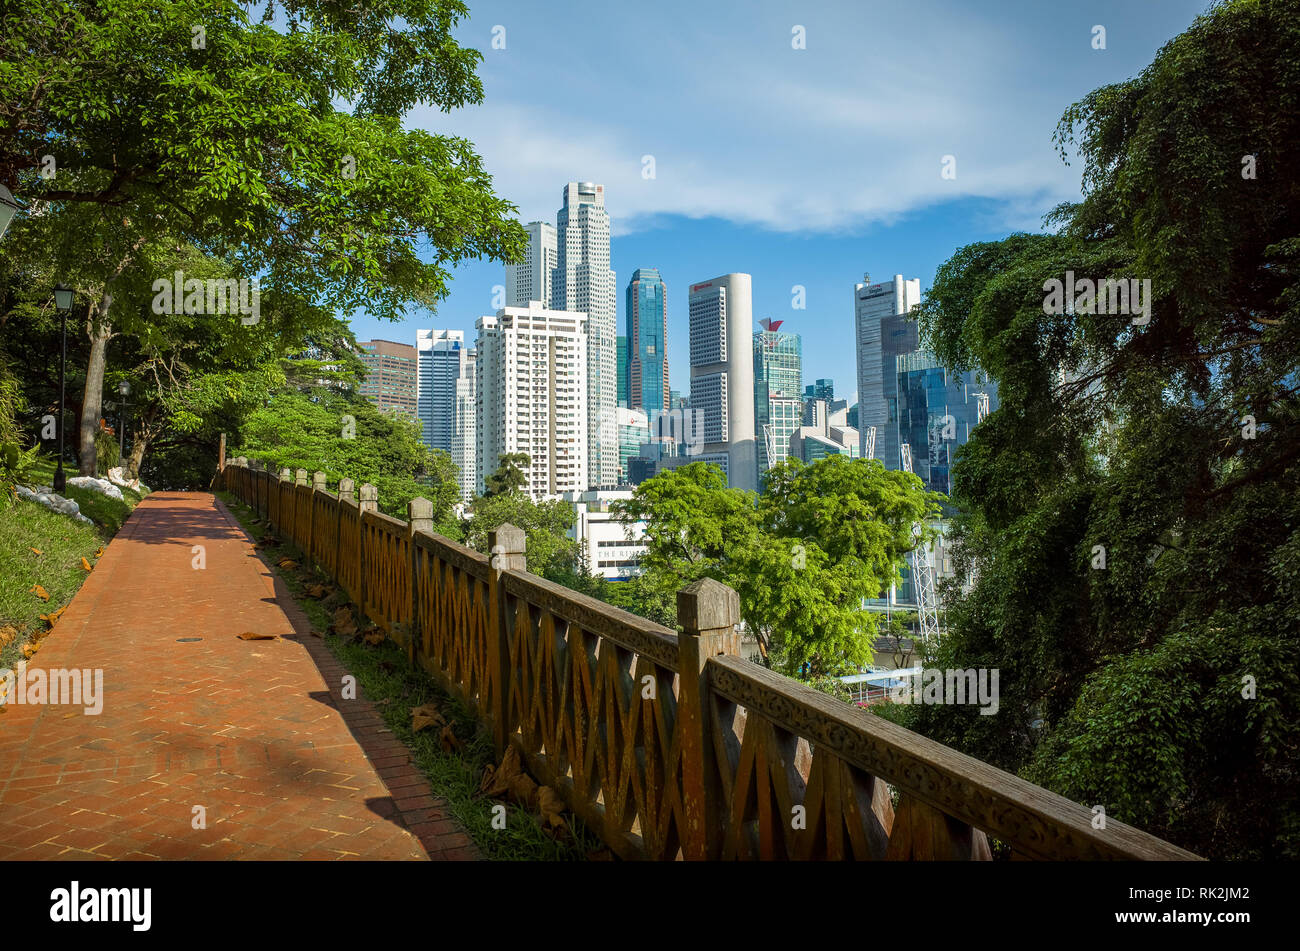 View of downtown buildings and skyline from Fort Canning Park walking path - Singapore Stock Photo